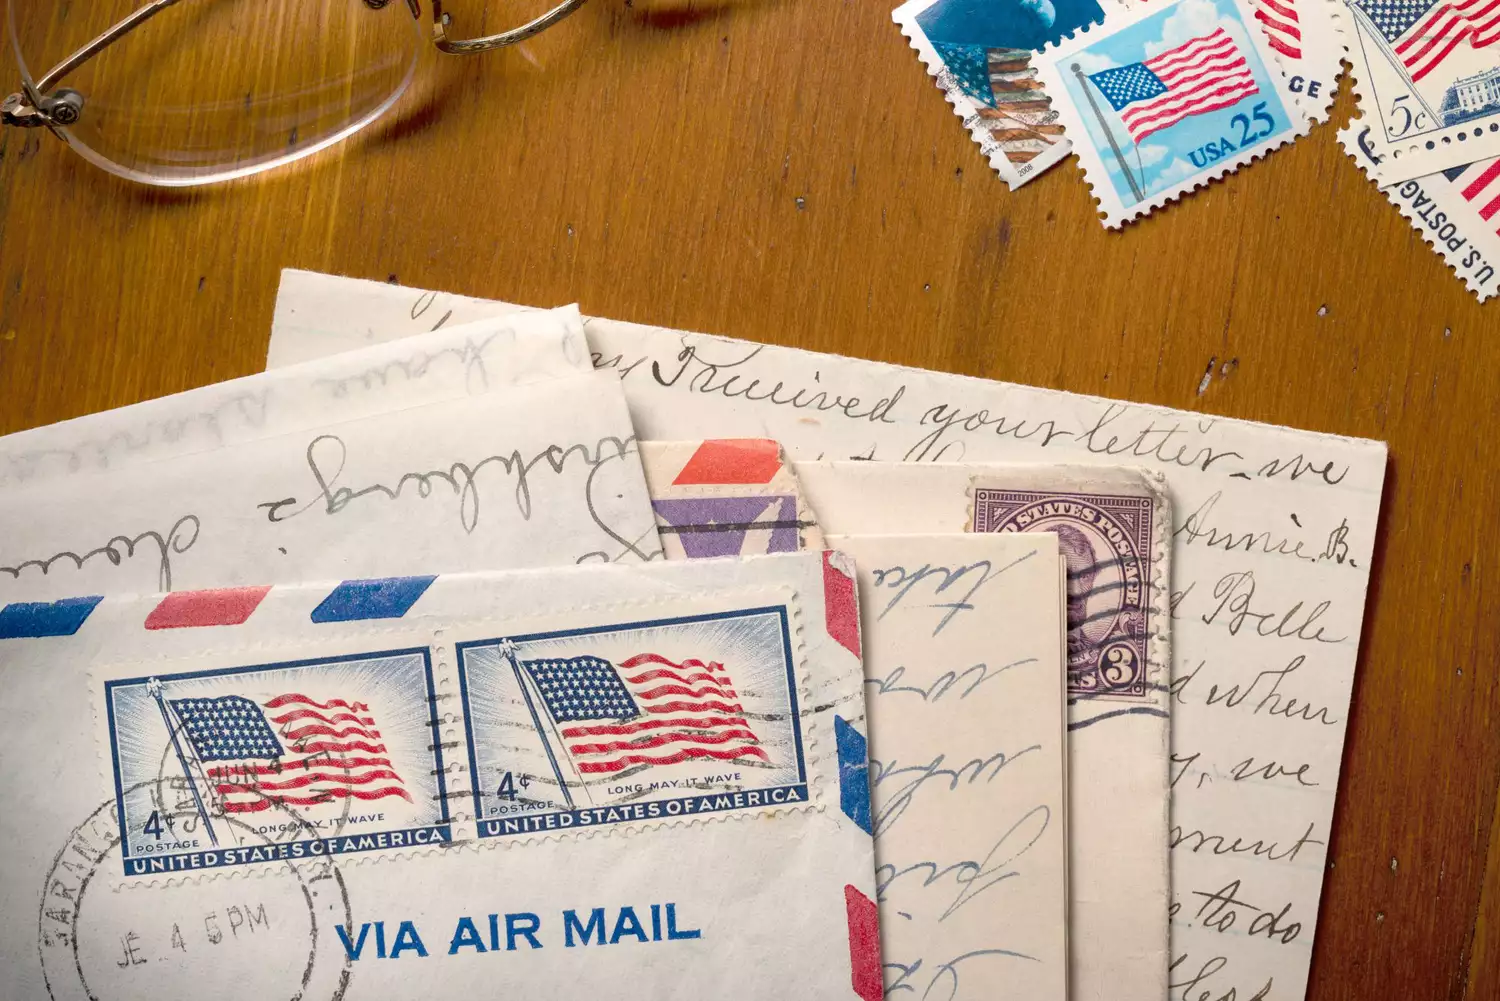 A World War II Soldier’s Letter Was Just Delivered to His Family—76 Years After It Was Written